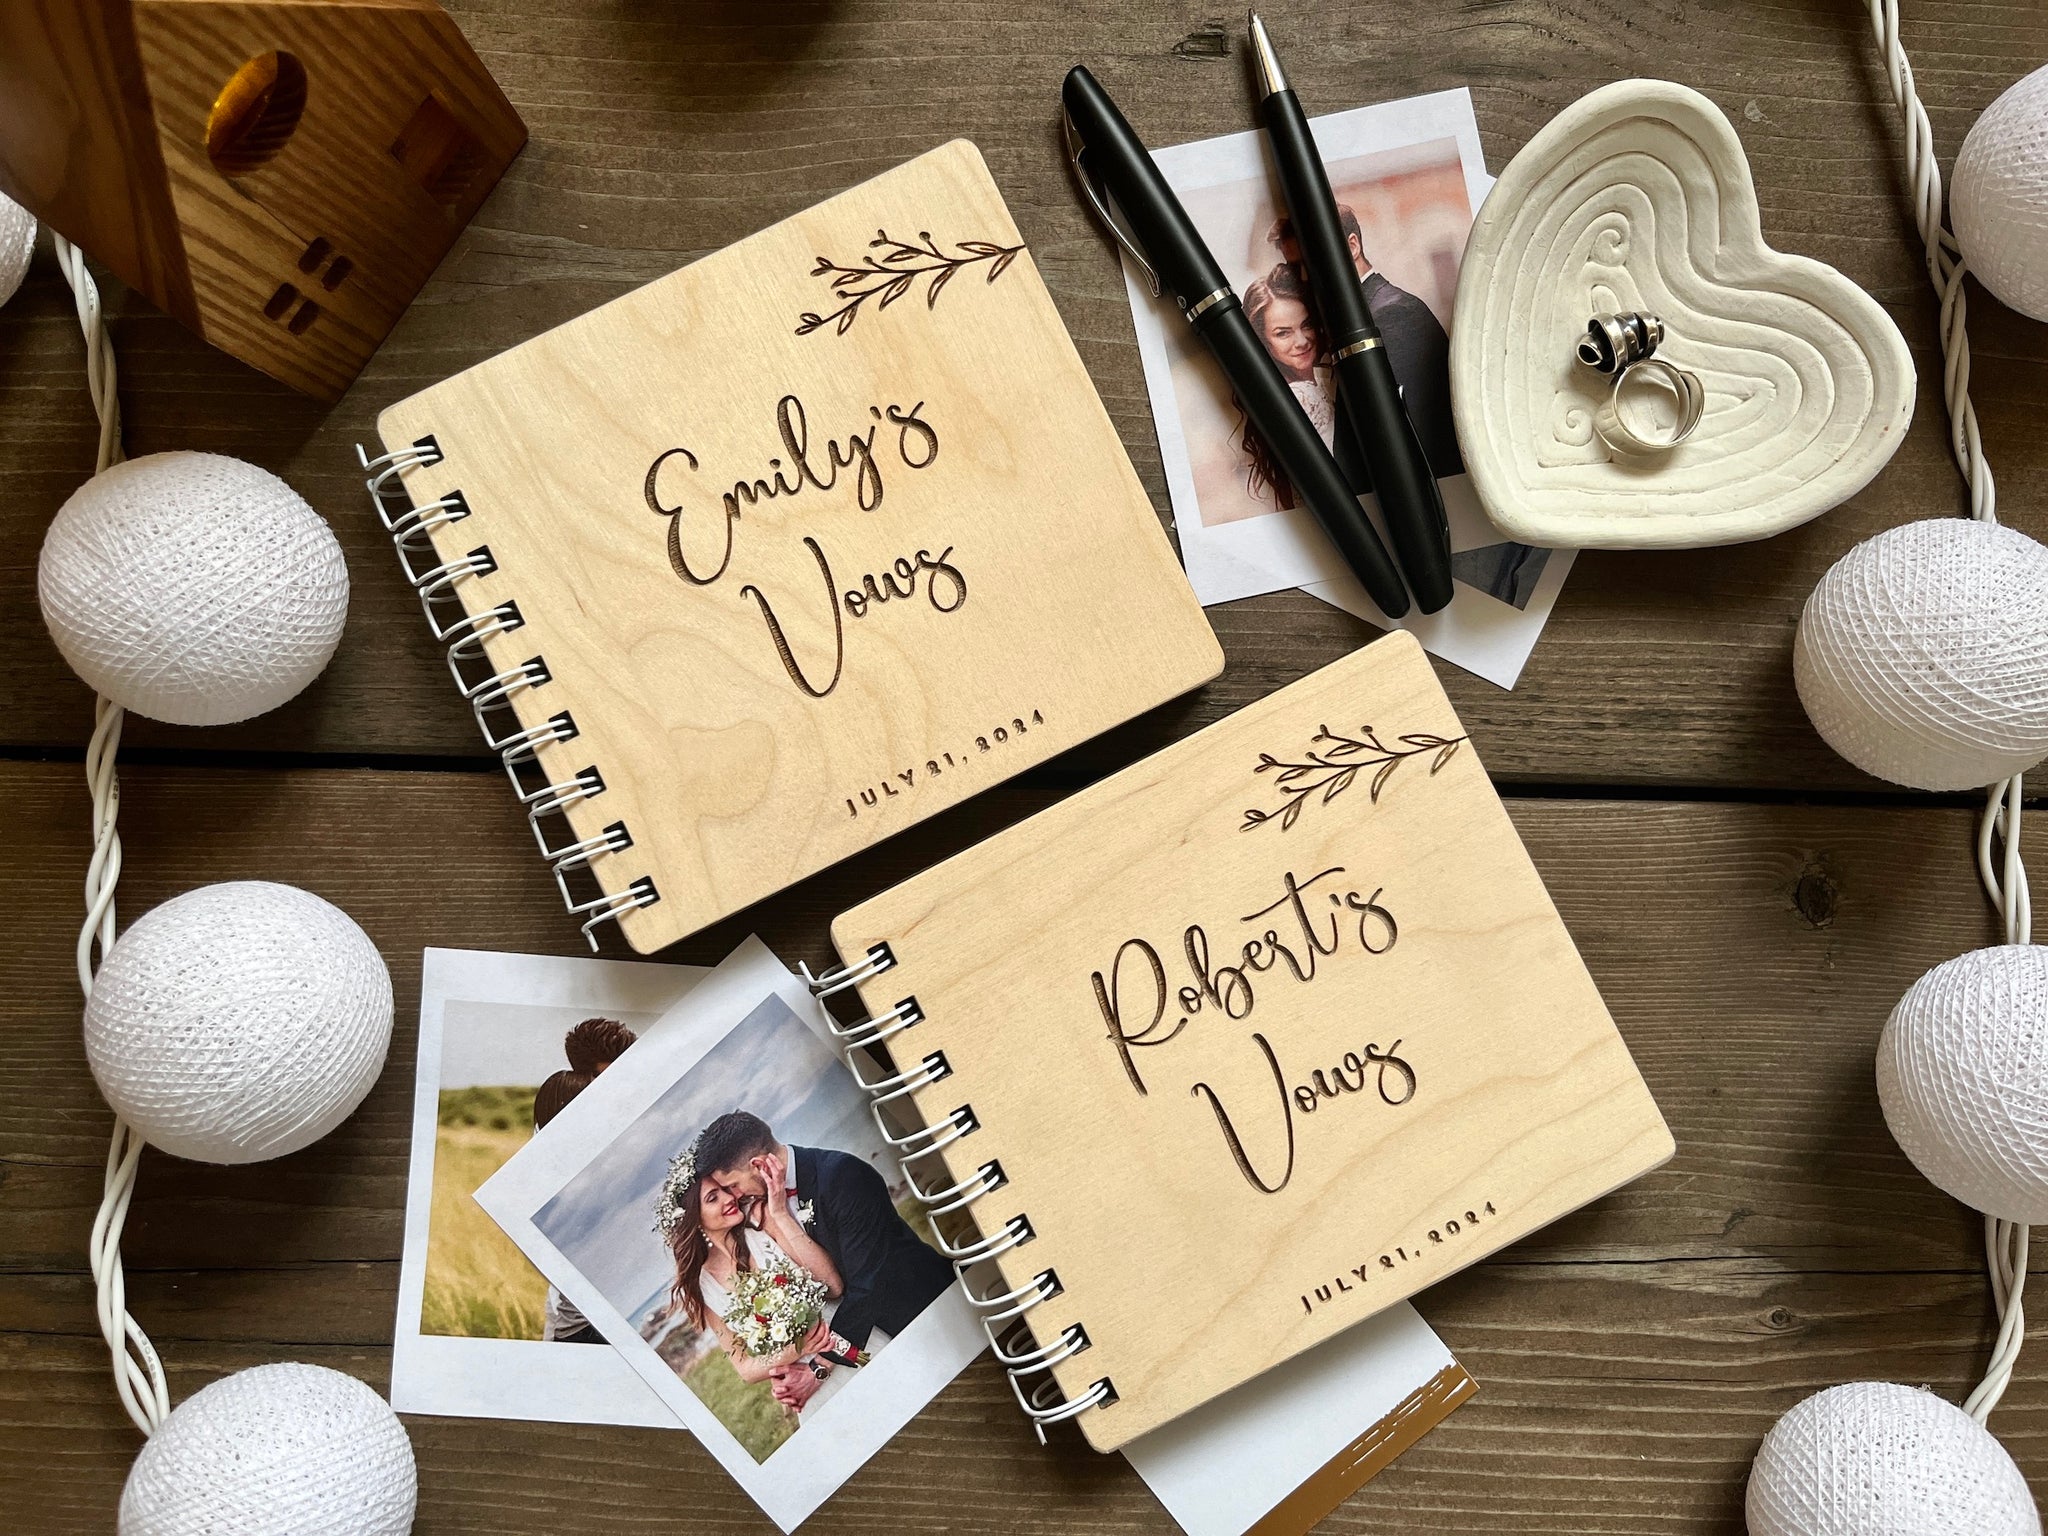 wedding vow books for bride and groom custom engraved with each others name and wedding date